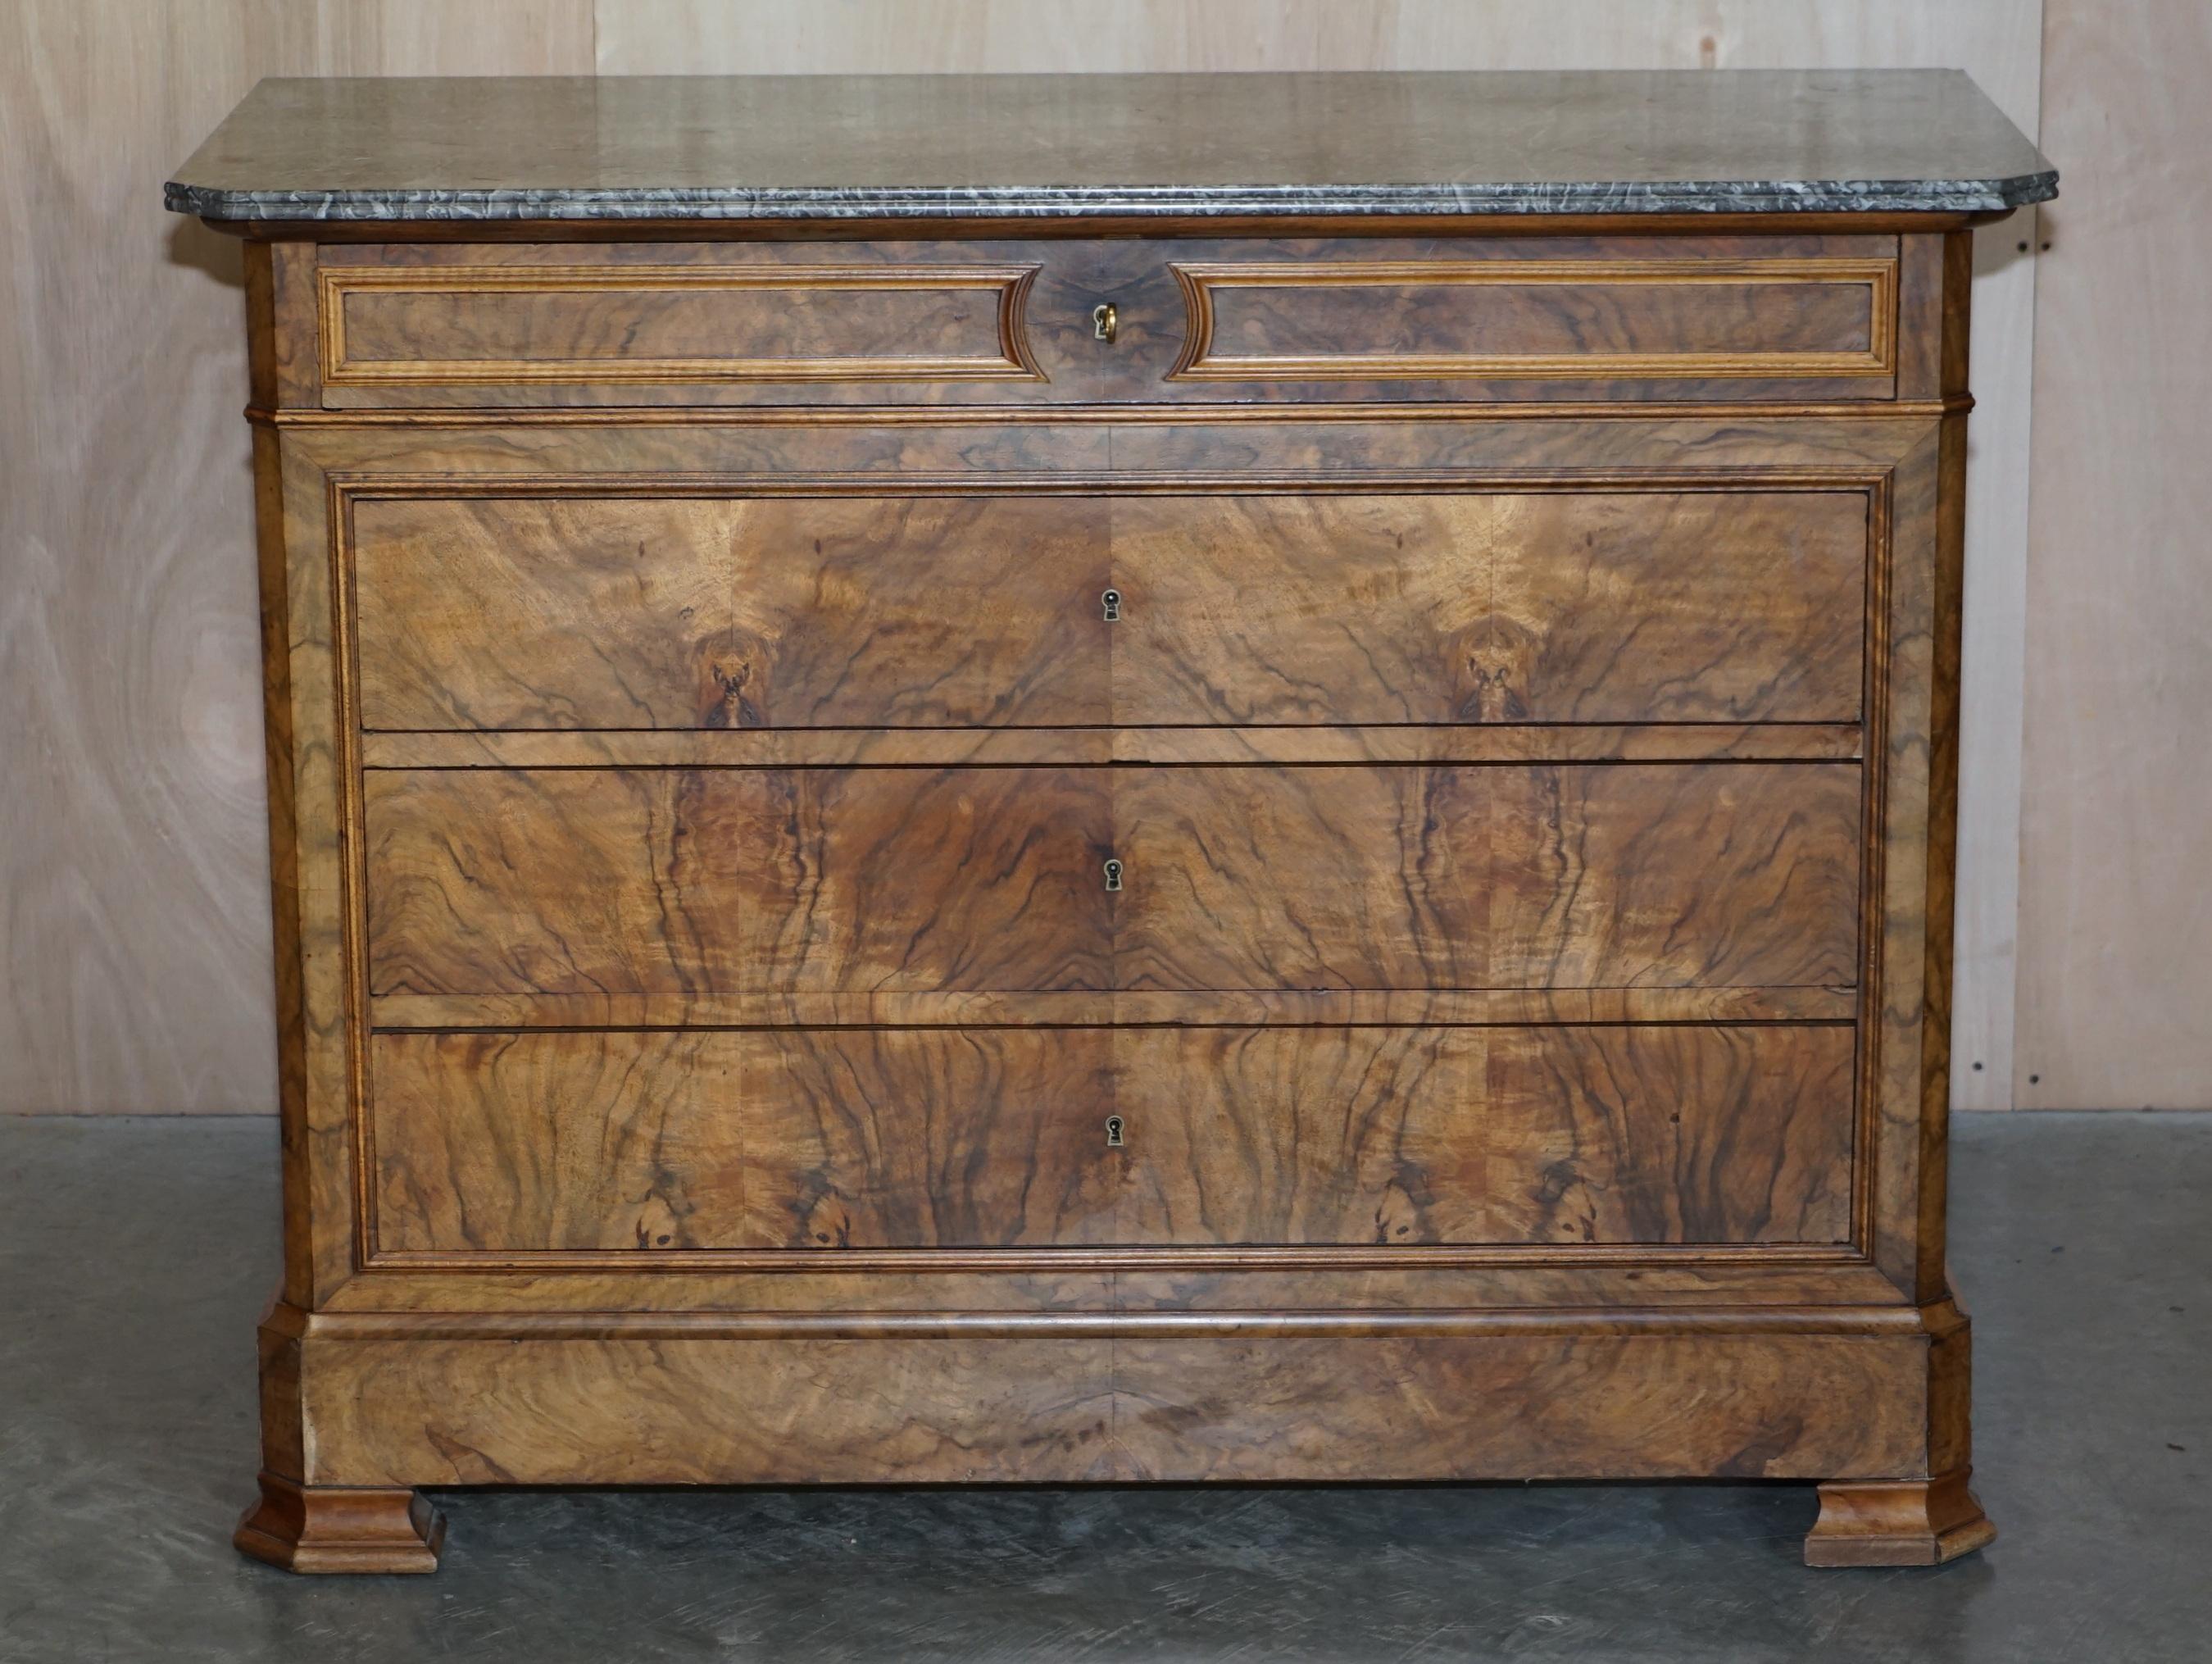 High Victorian Antique circa 1860 Walnut & Marble Topped Chest of Drawers with Original Key For Sale